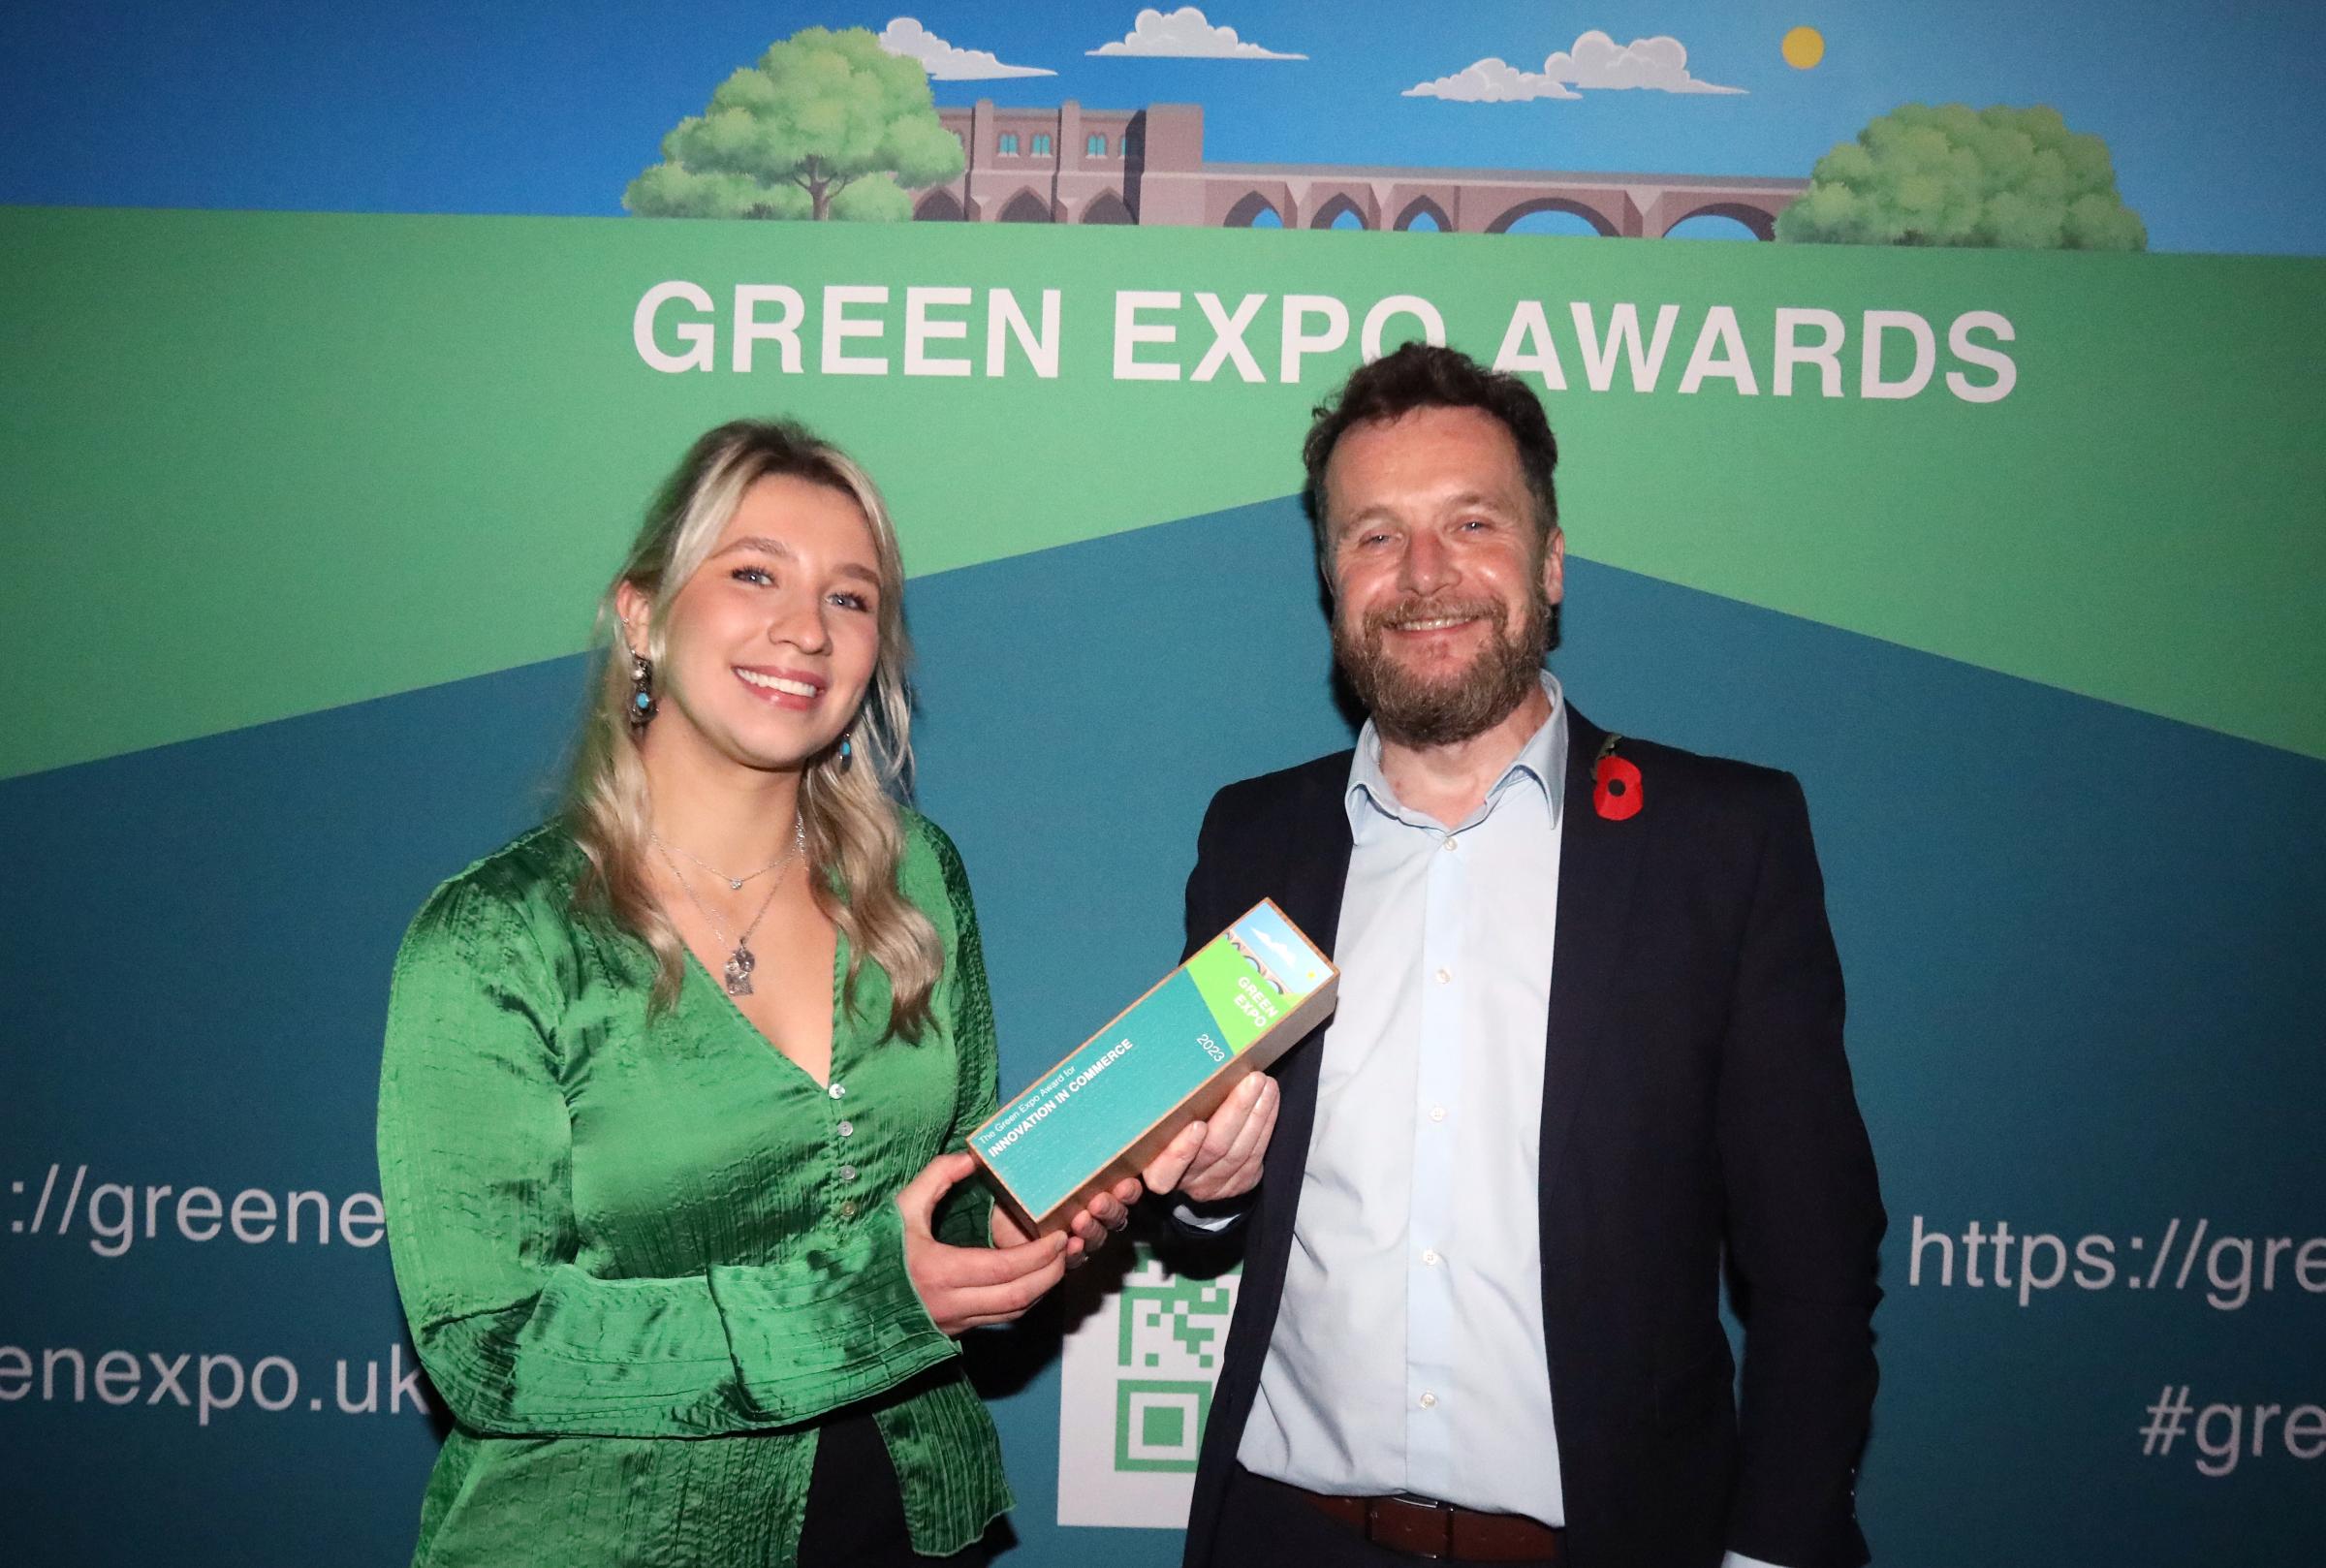 Robyn Lees, Net Zero Innovation & Delivery Officer at Warrington Borough Council, received the award on behalf of Golden Square Shopping Centre and Ralph Kemp, Head of Environmental Services at Cheshire East. Photo: Ian Cooper/Ian Cooper Photography